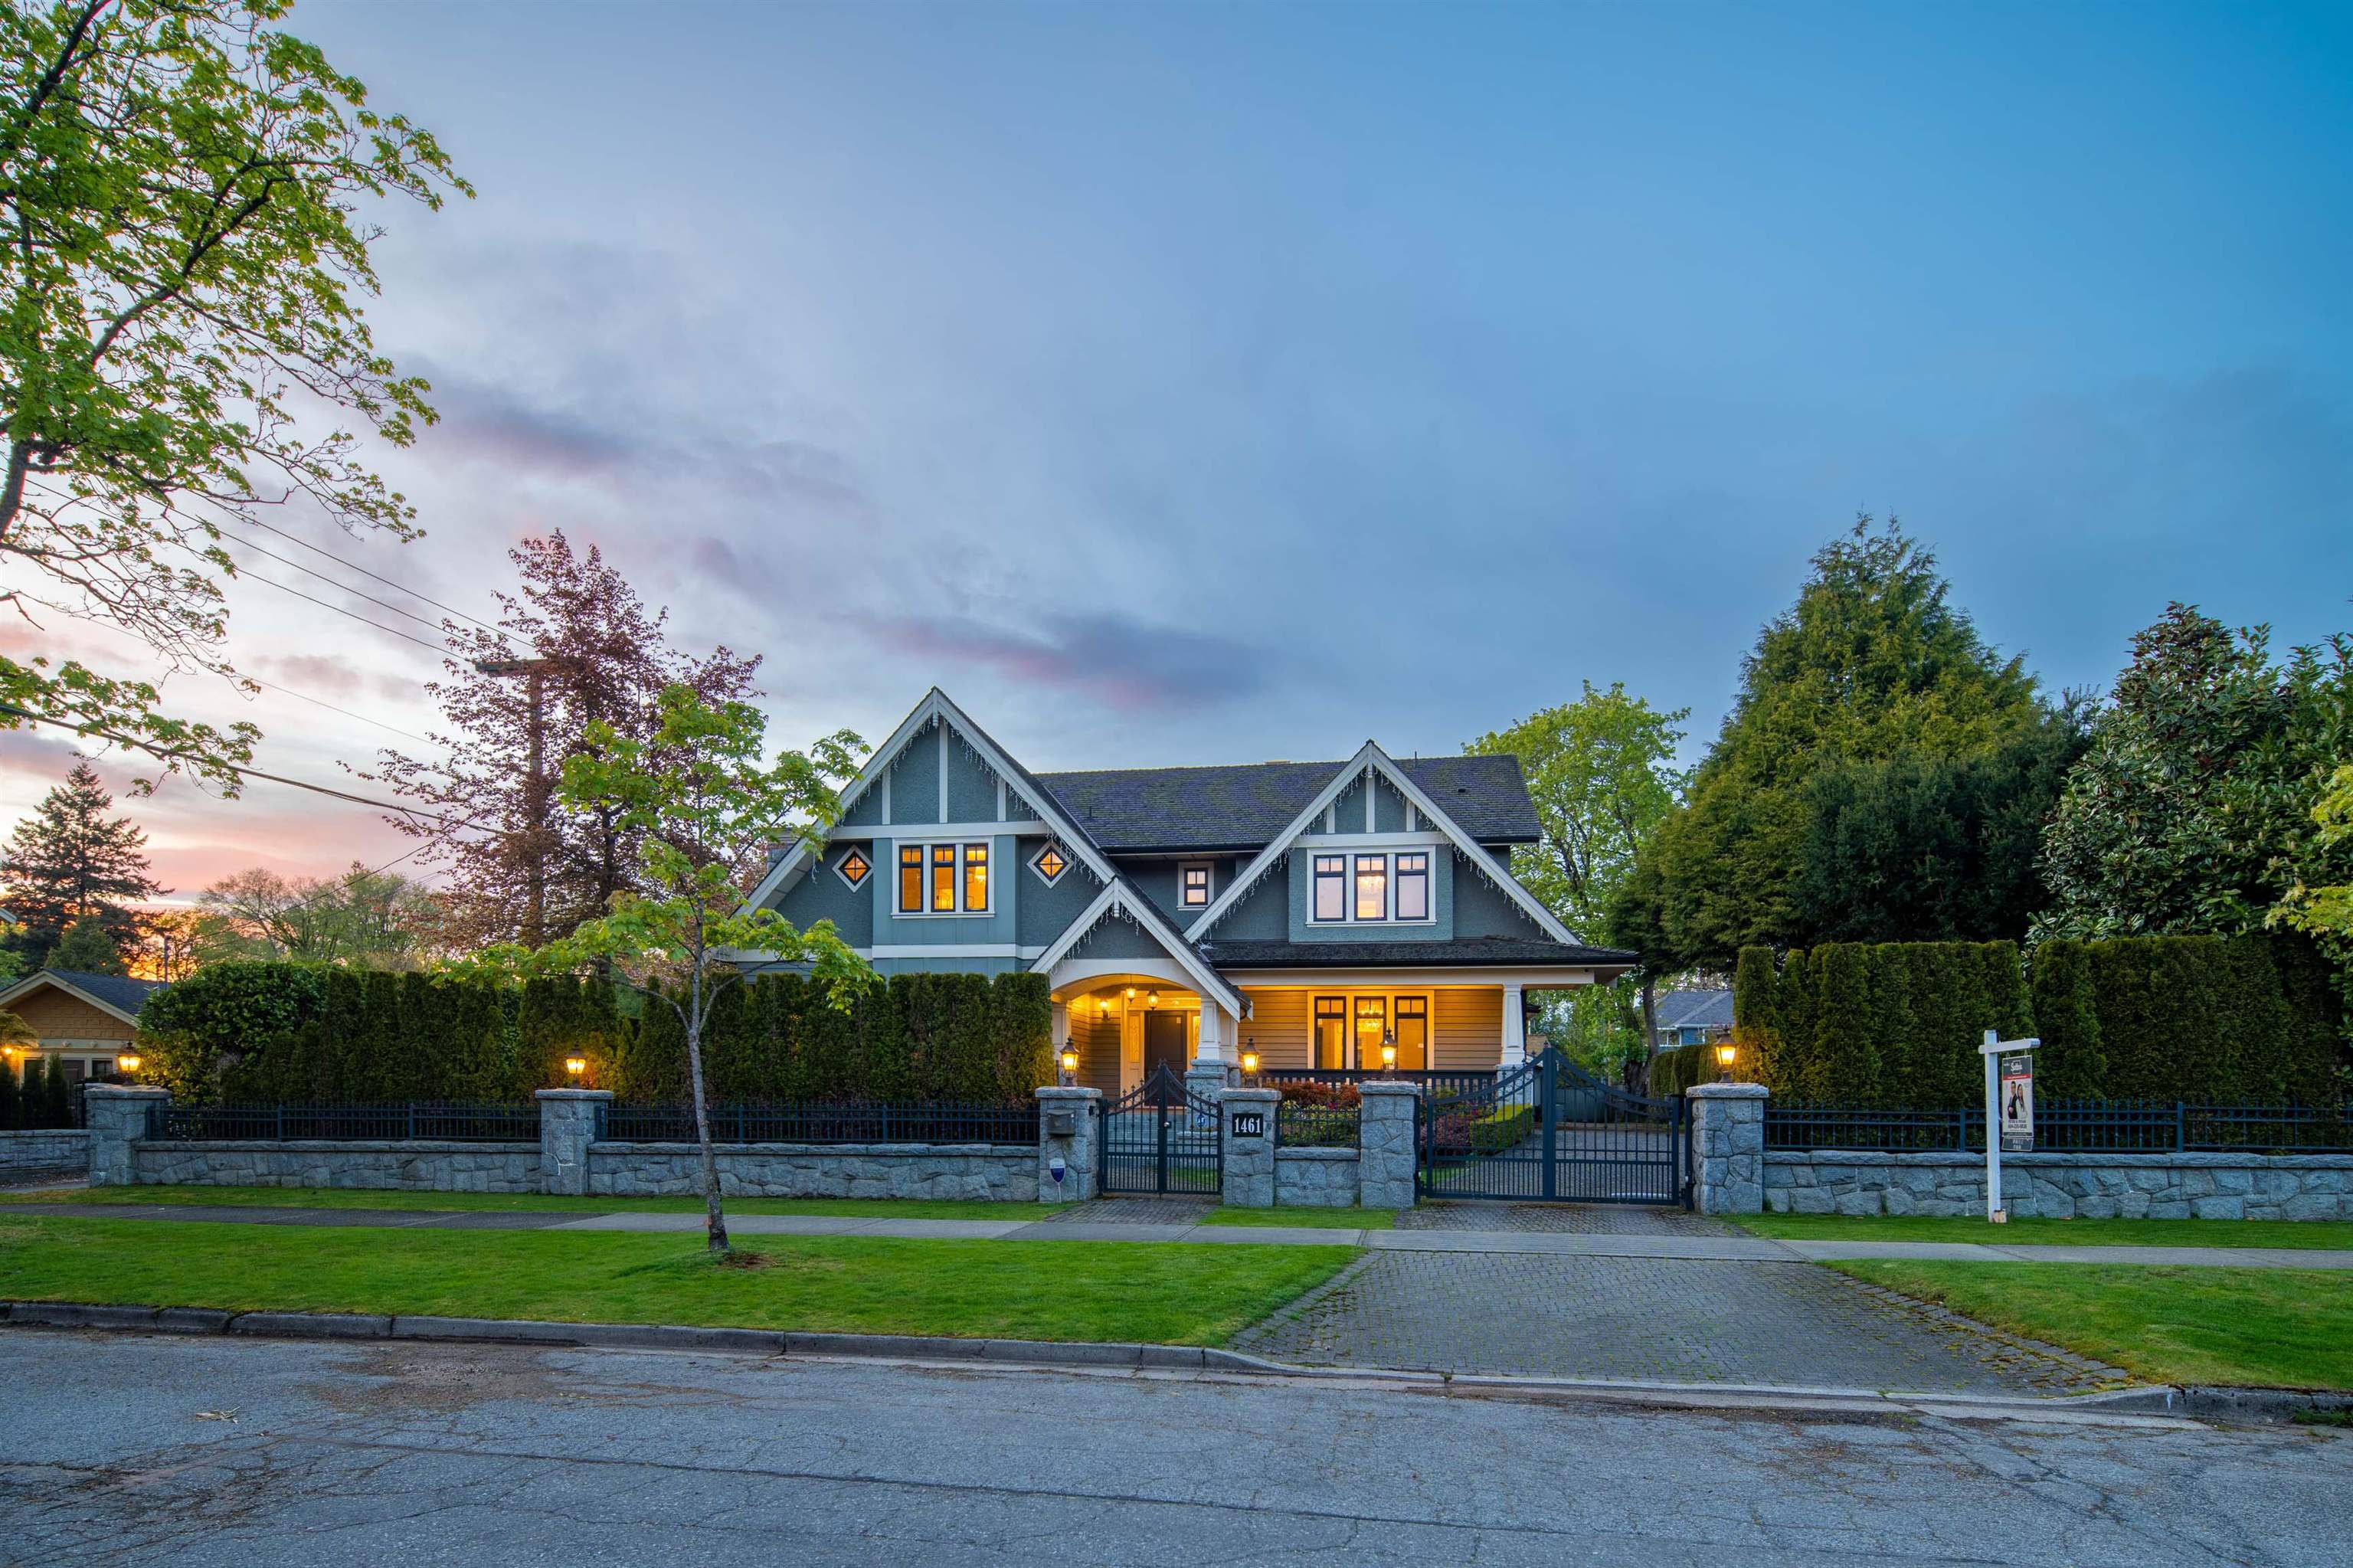 Listing image of 1461 CONNAUGHT DRIVE